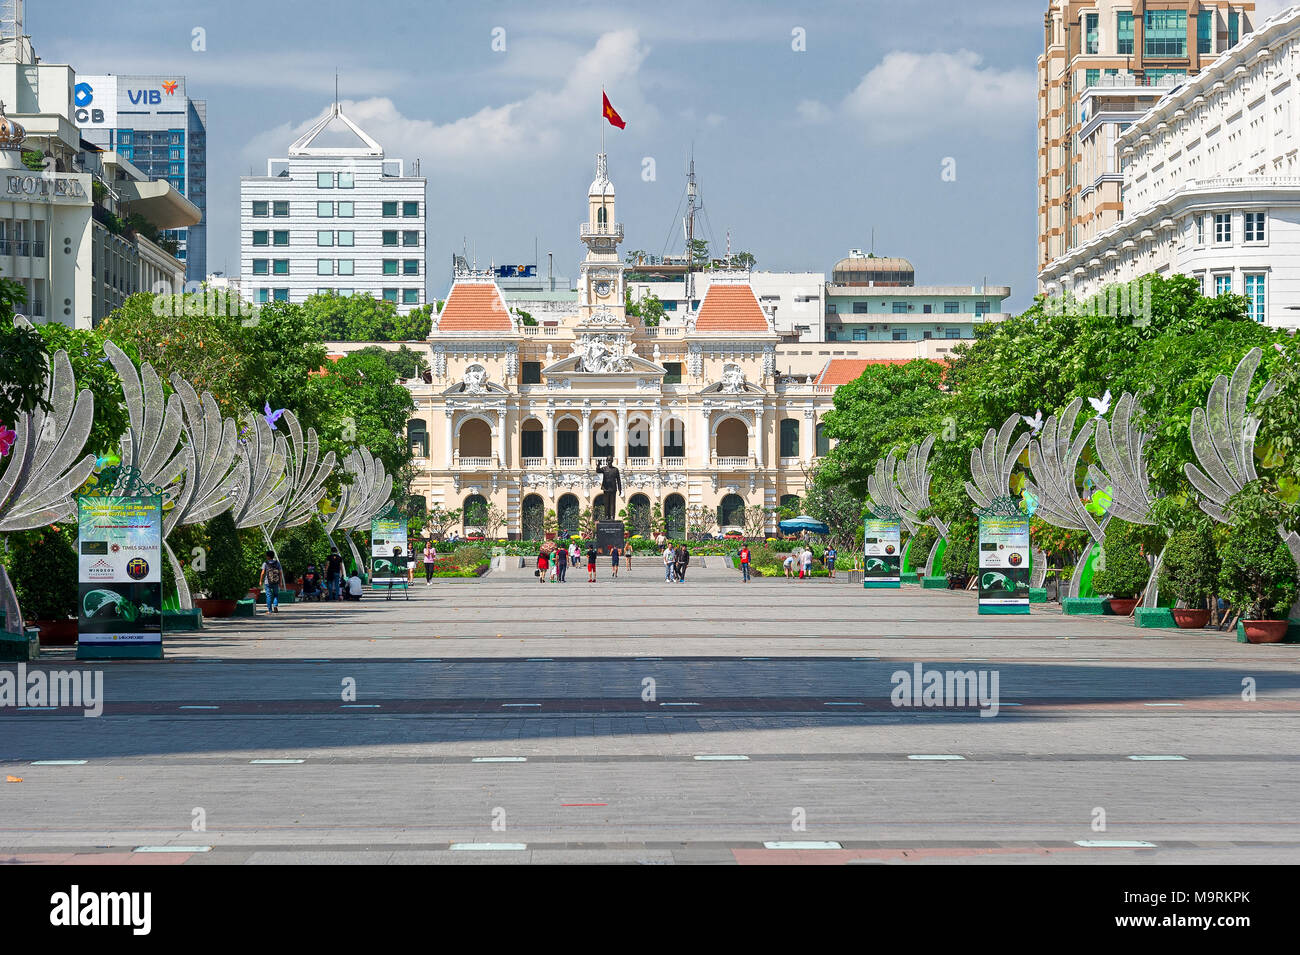 HO CHI MINH CITY, VIETNAM - APRIL 9, 2017: People's Committee Head office Stock Photo